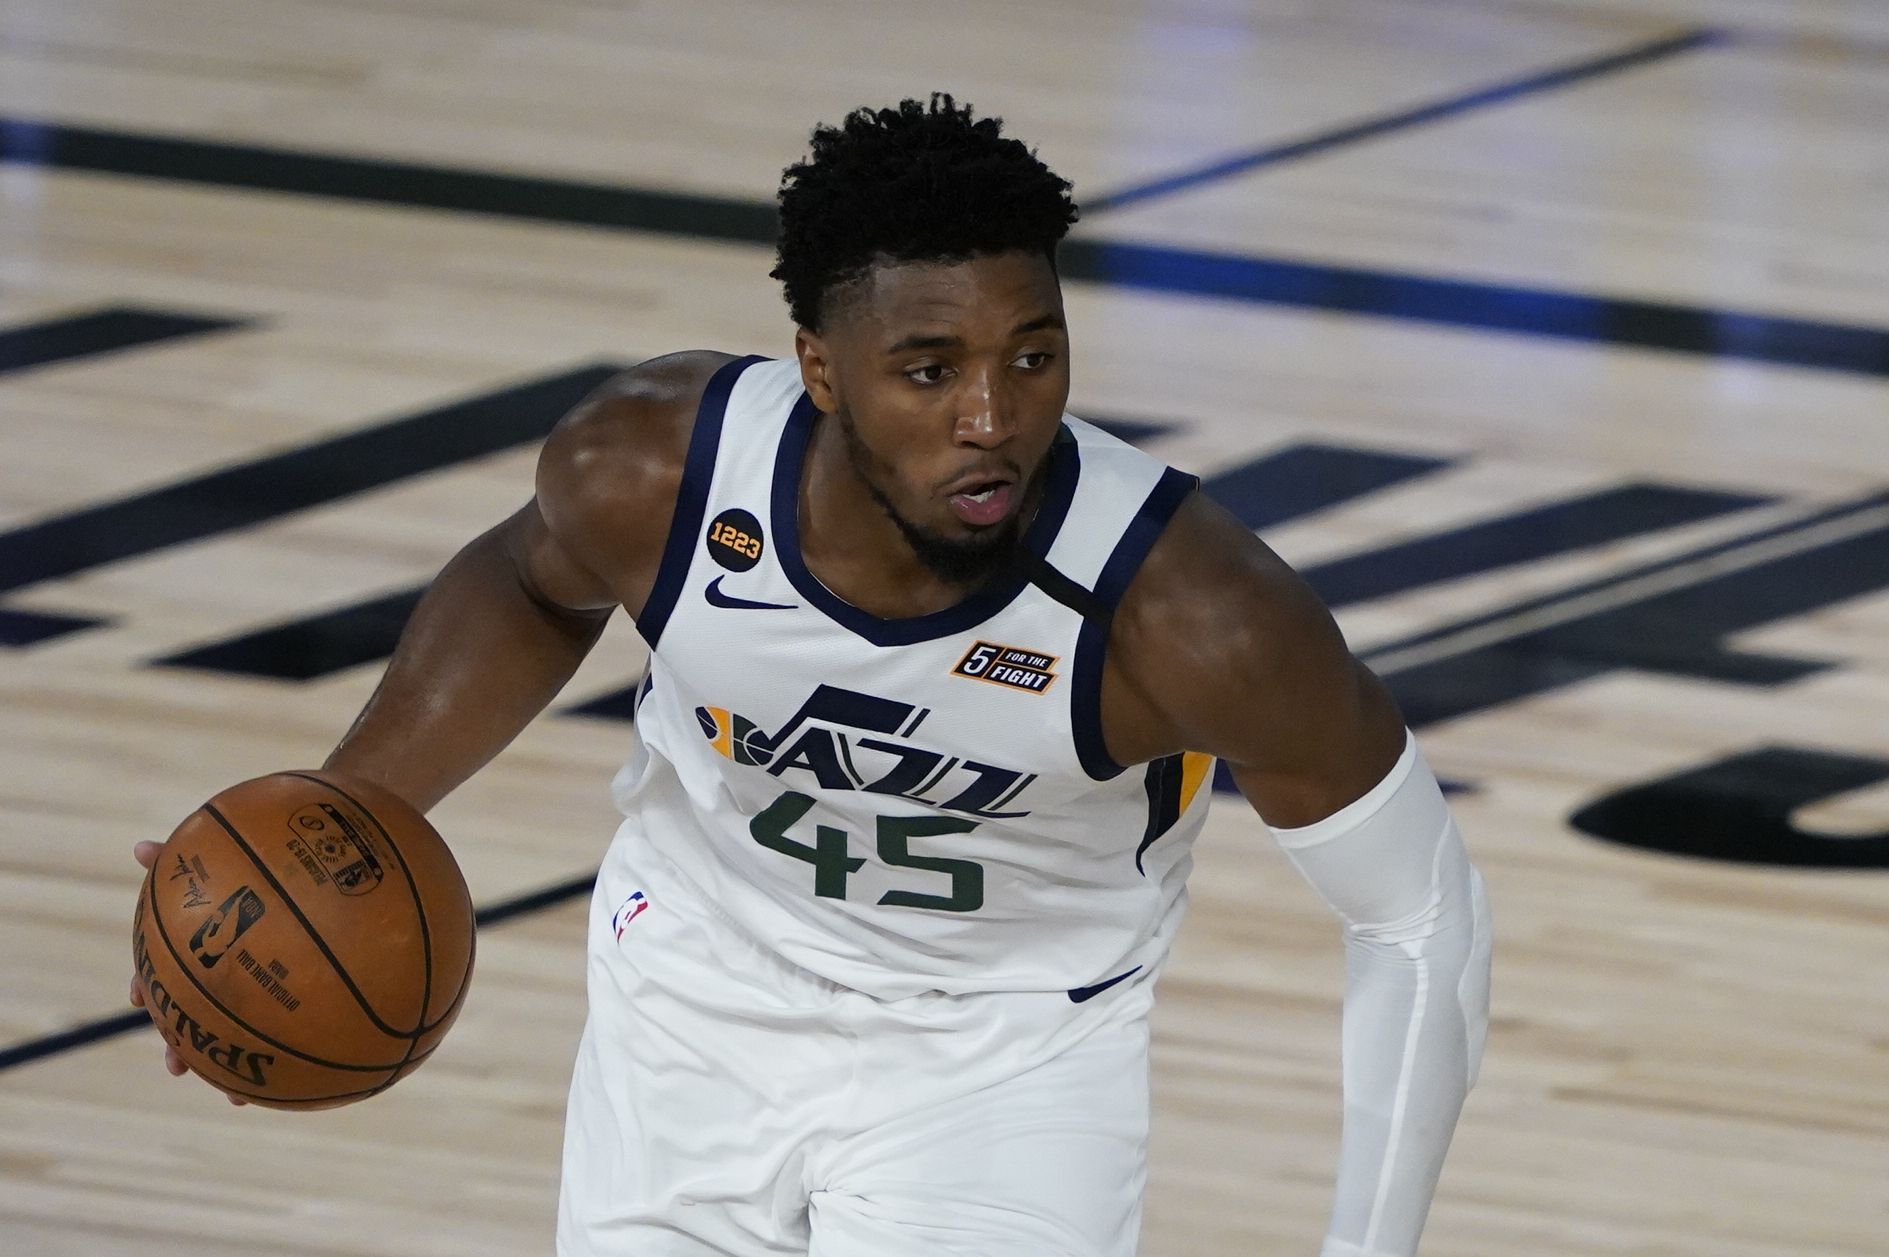 Donovan Mitchell greeted by 200-300 friends and family in hometown